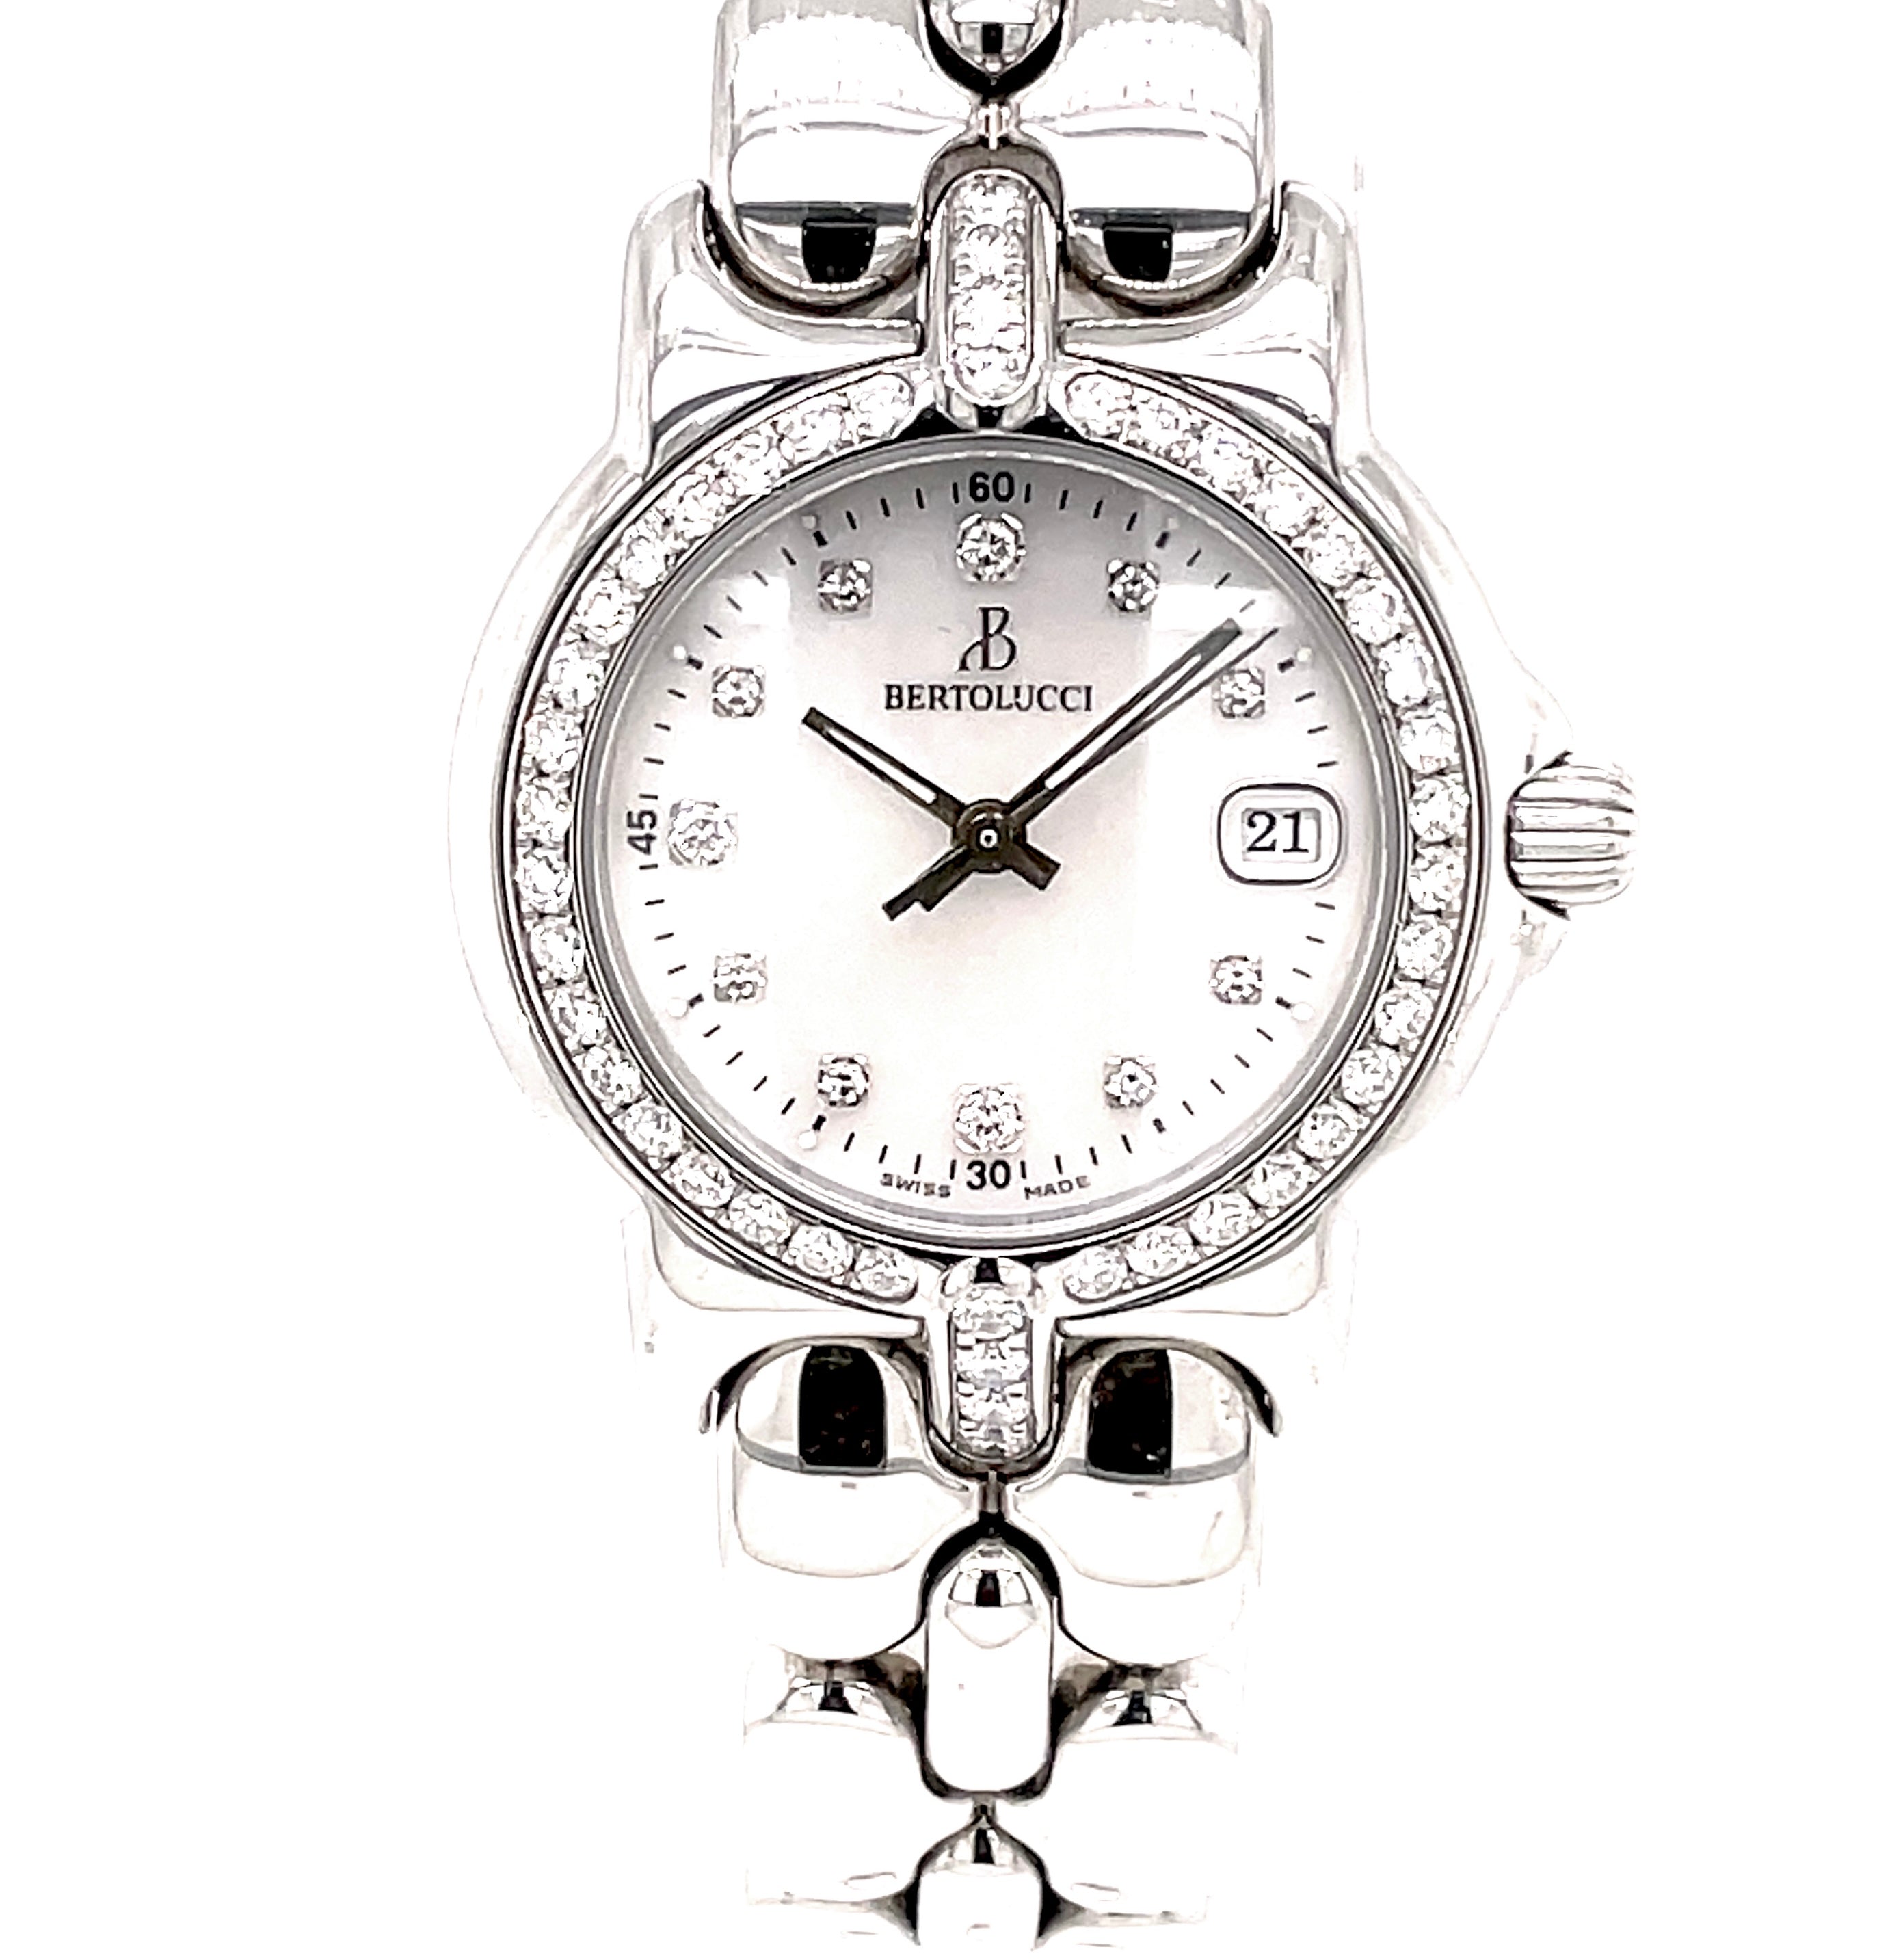 This Bertolucci Diamond Vir Stainless Steel Watch features a 0.55 ct round diamonds on its MOP dial, as well as quartz movement and a stainless steel link bracelet fastened with a deployment buckle. Hour markers are also present in diamond.